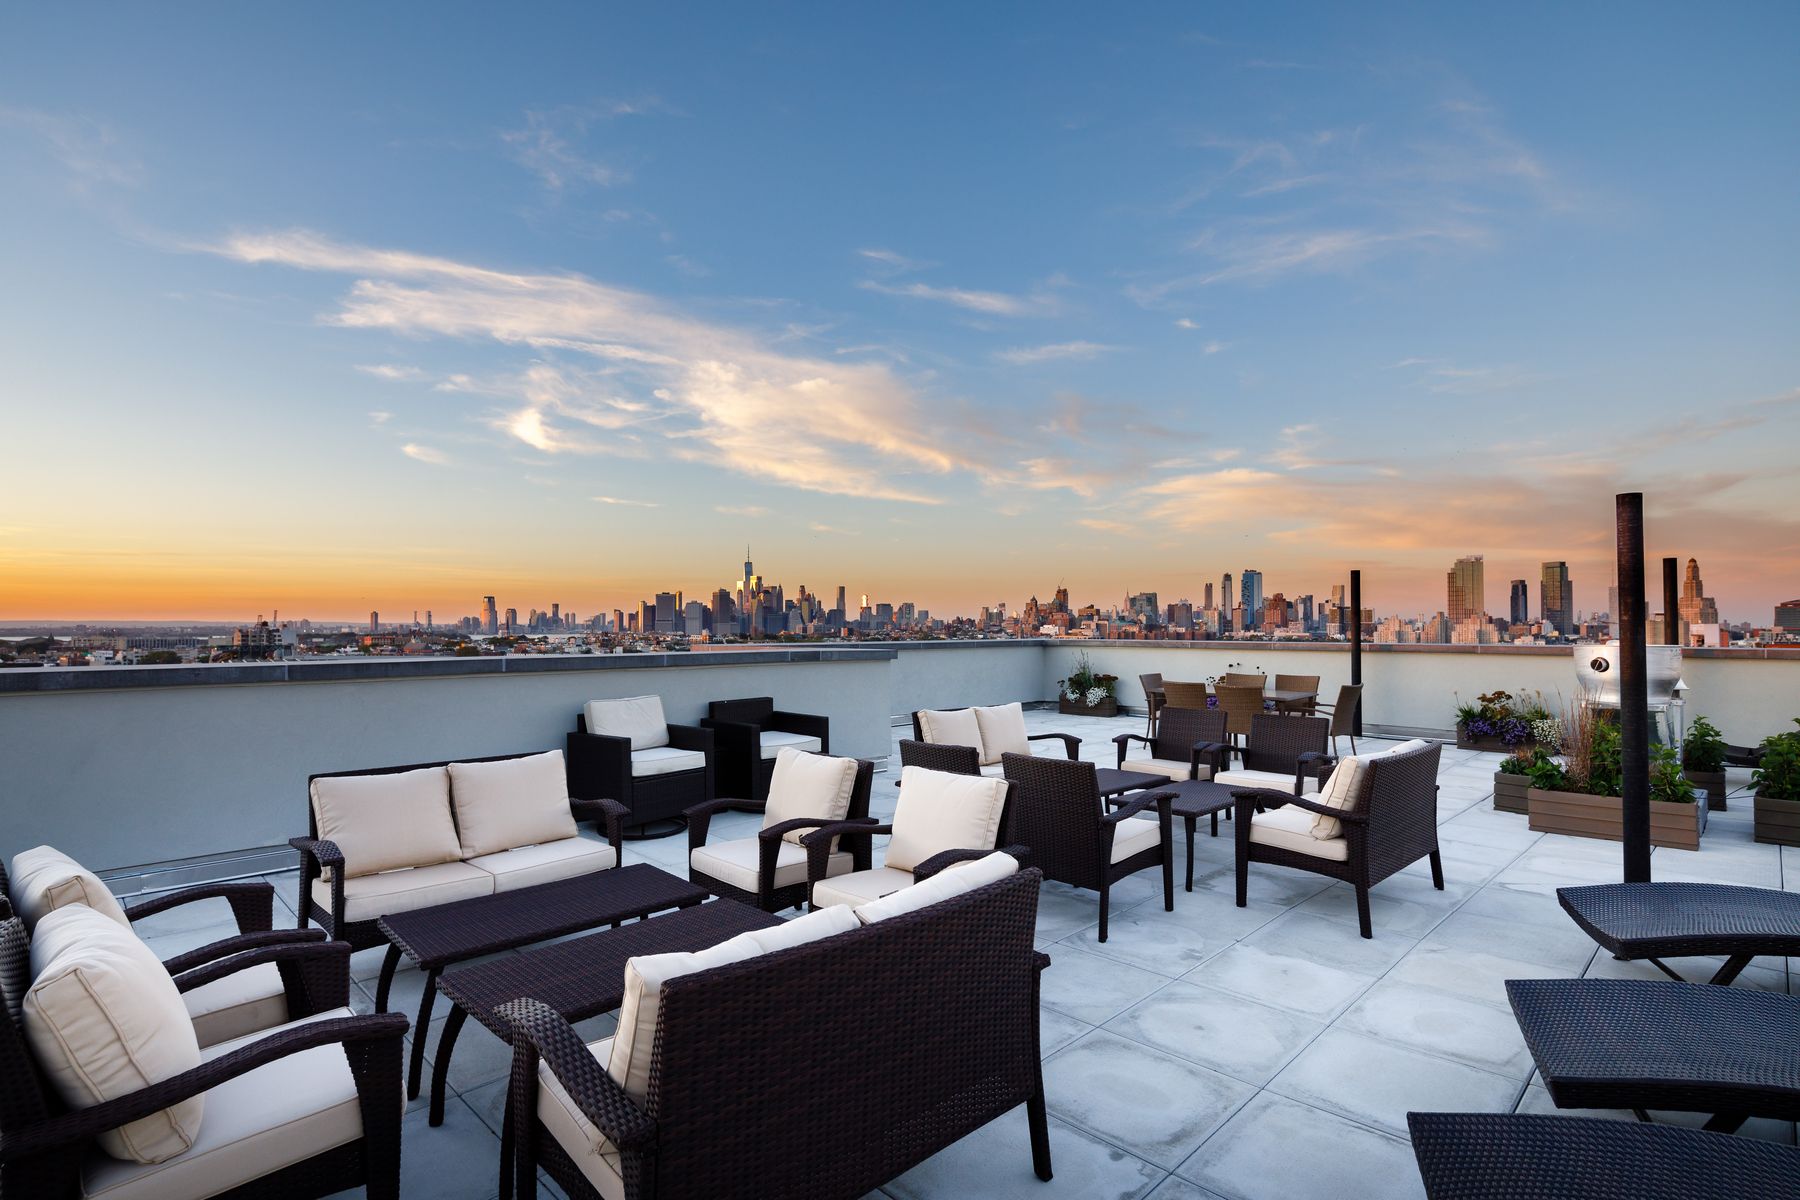 Rooftop deck with ample seating and lounge chairs with city views